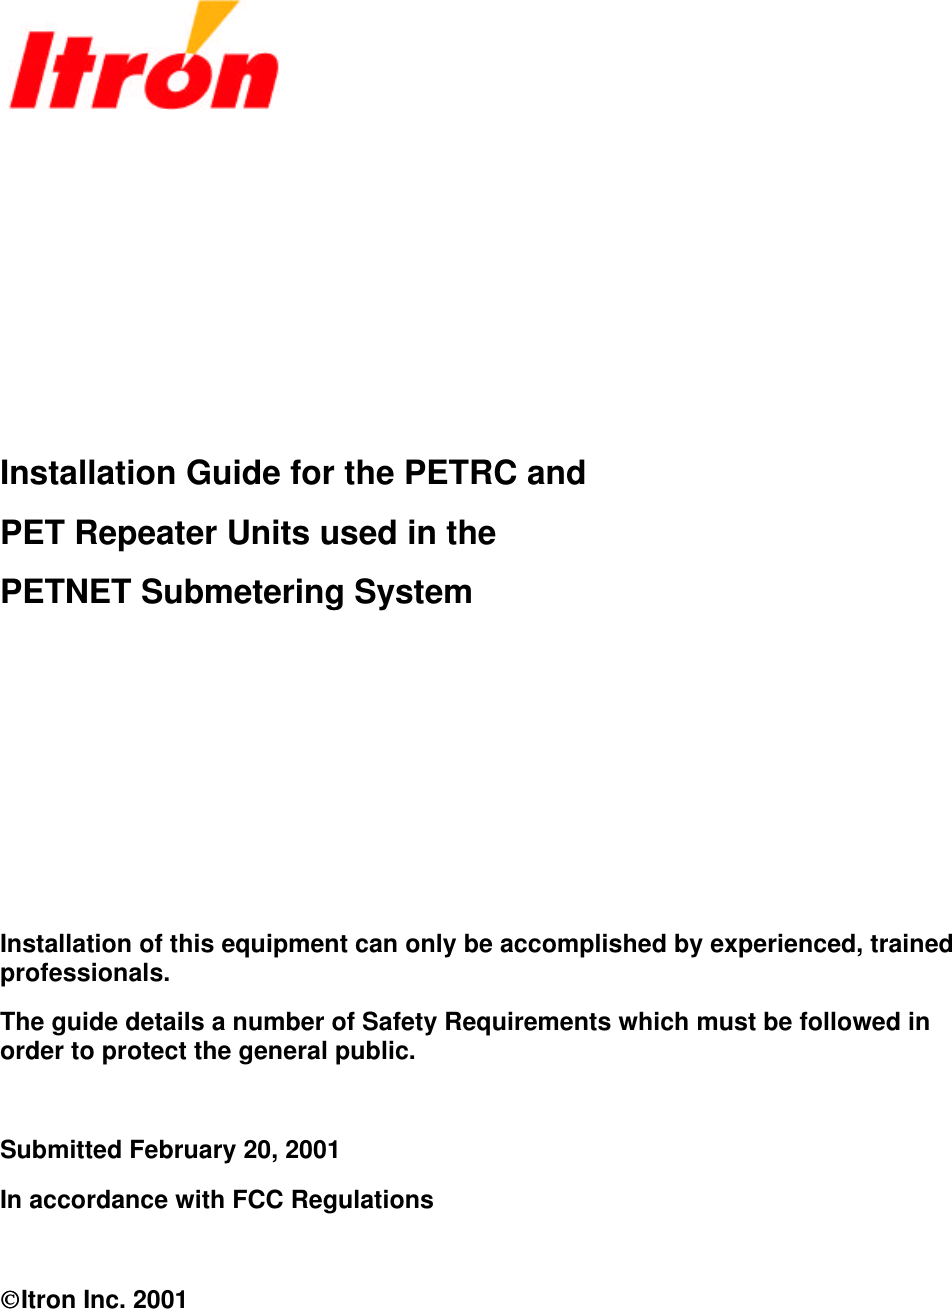          Installation Guide for the PETRC and PET Repeater Units used in the PETNET Submetering System       Installation of this equipment can only be accomplished by experienced, trained professionals. The guide details a number of Safety Requirements which must be followed in order to protect the general public.  Submitted February 20, 2001 In accordance with FCC Regulations  Itron Inc. 2001 